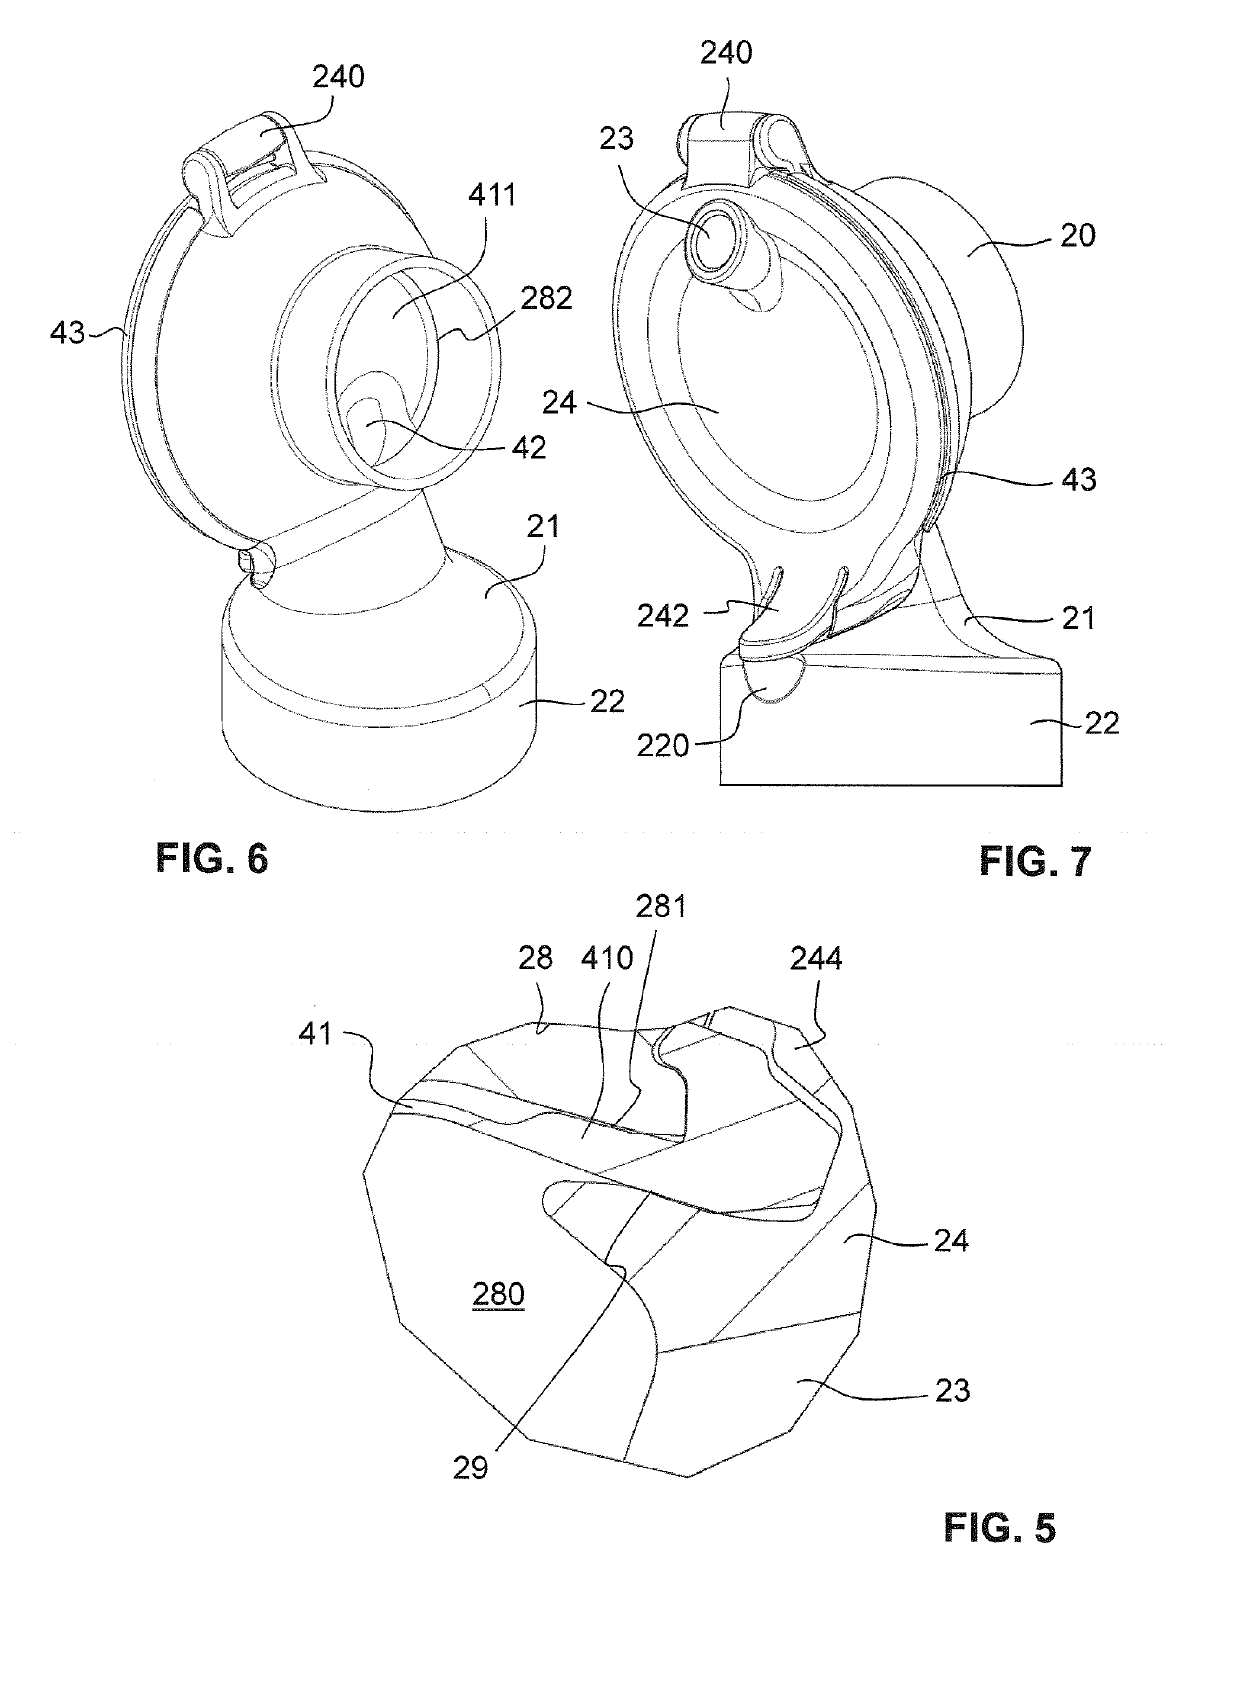 Adapter with media separating diaphragm for a breast shield